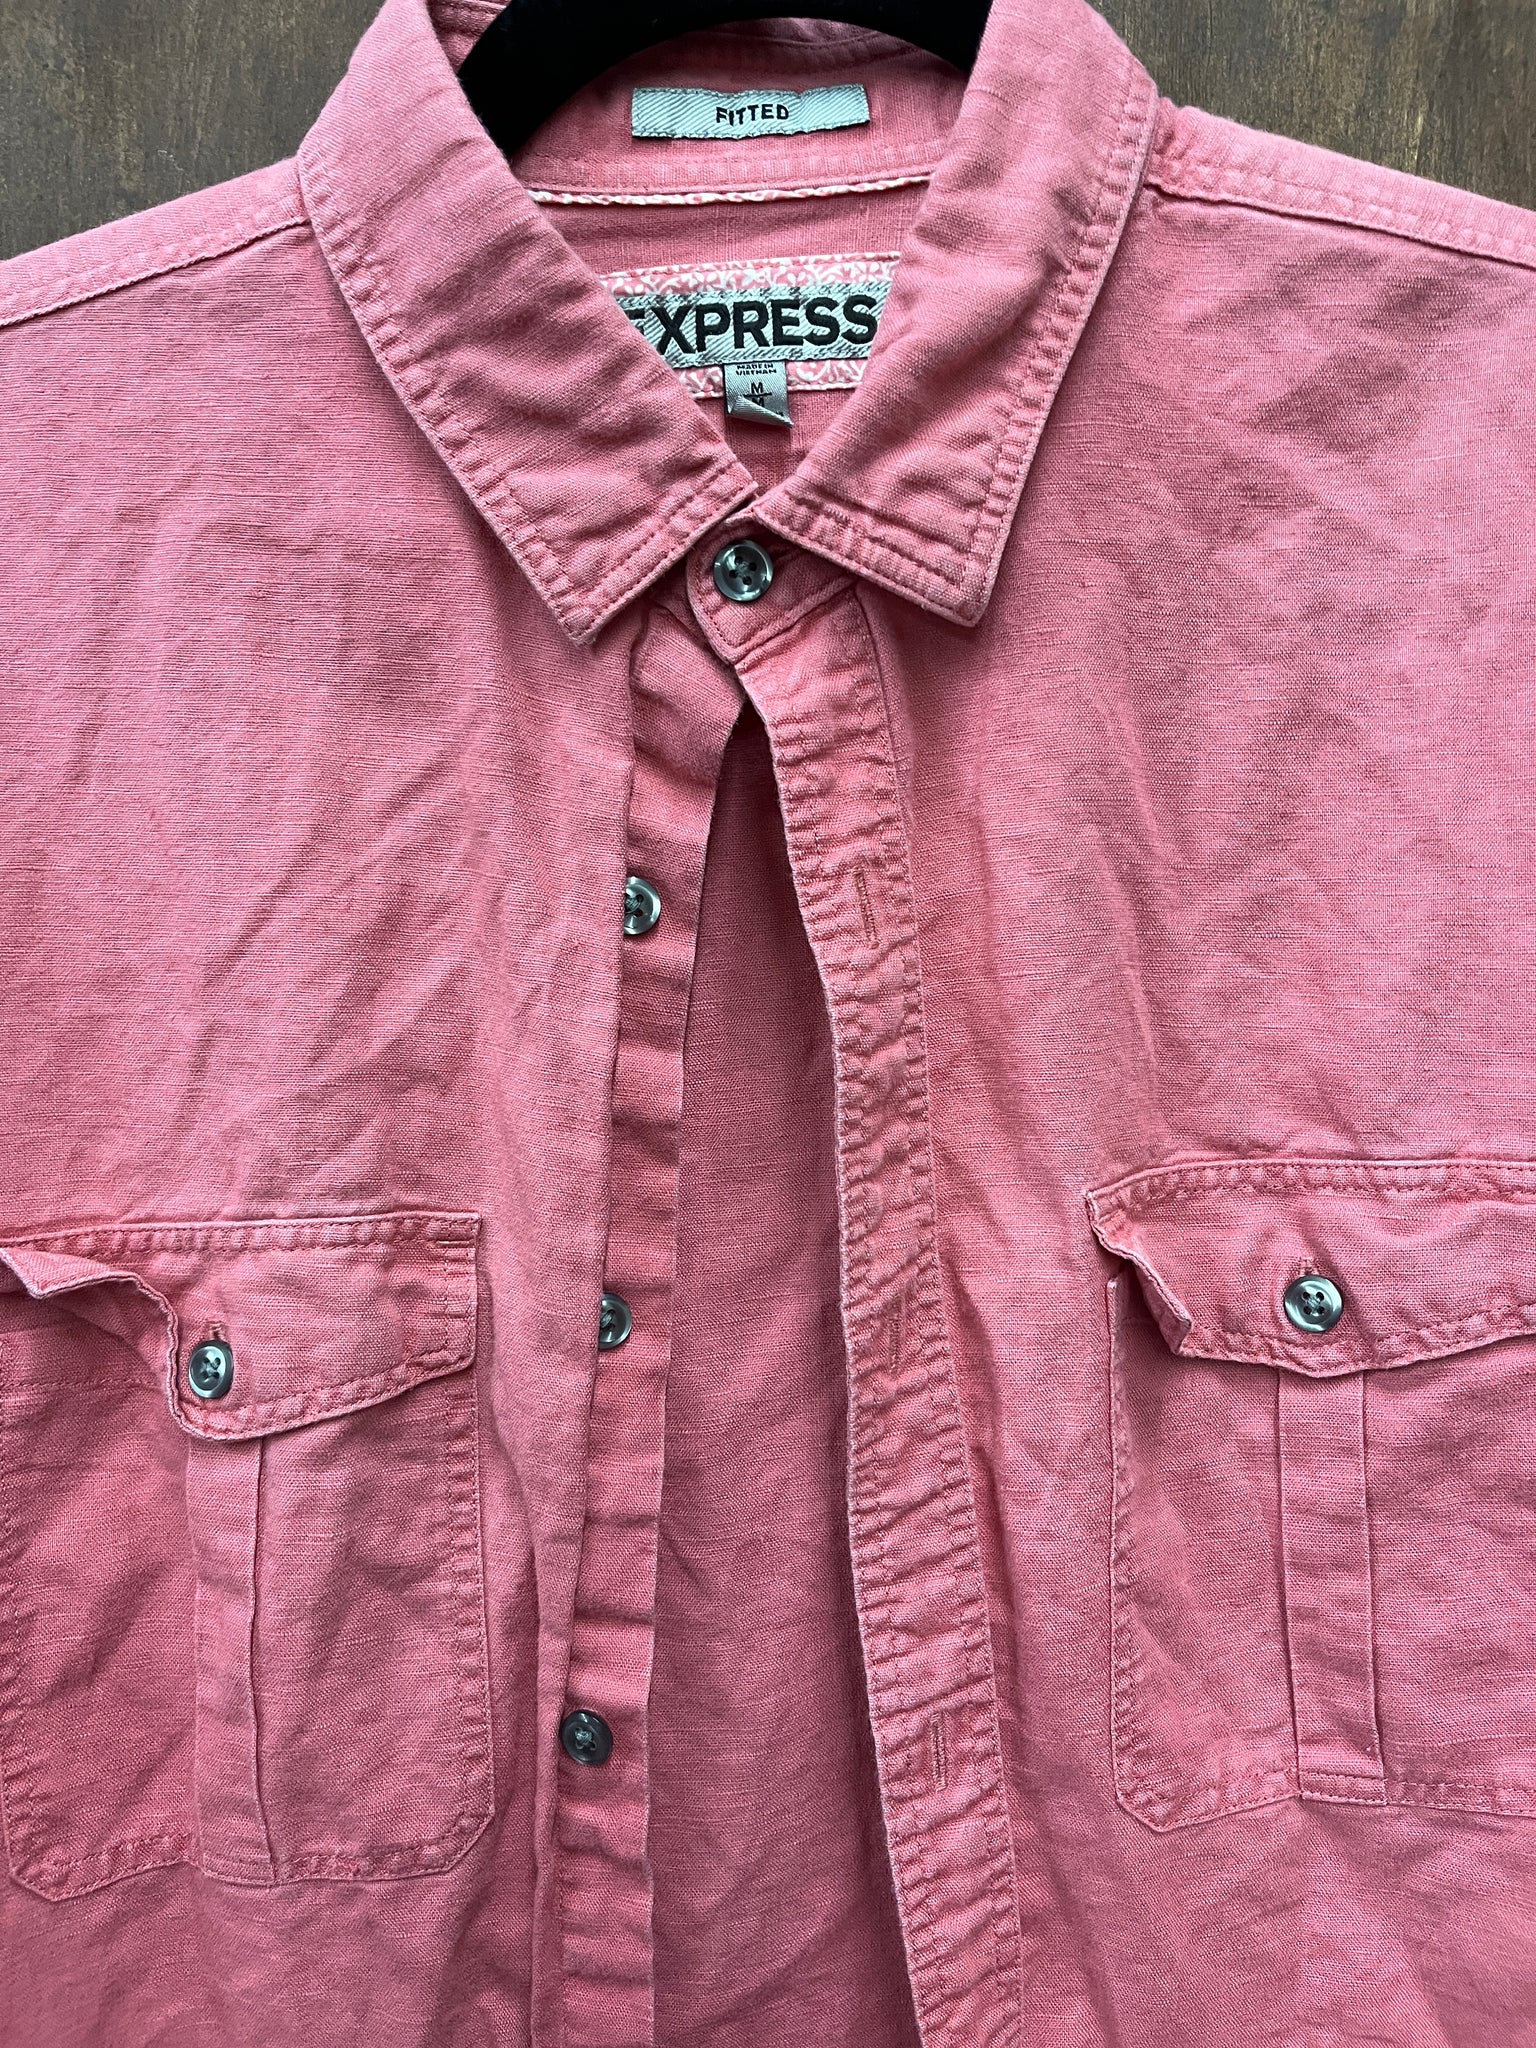 1990s MENS TOP- Express- fitted coral long sleeve button up